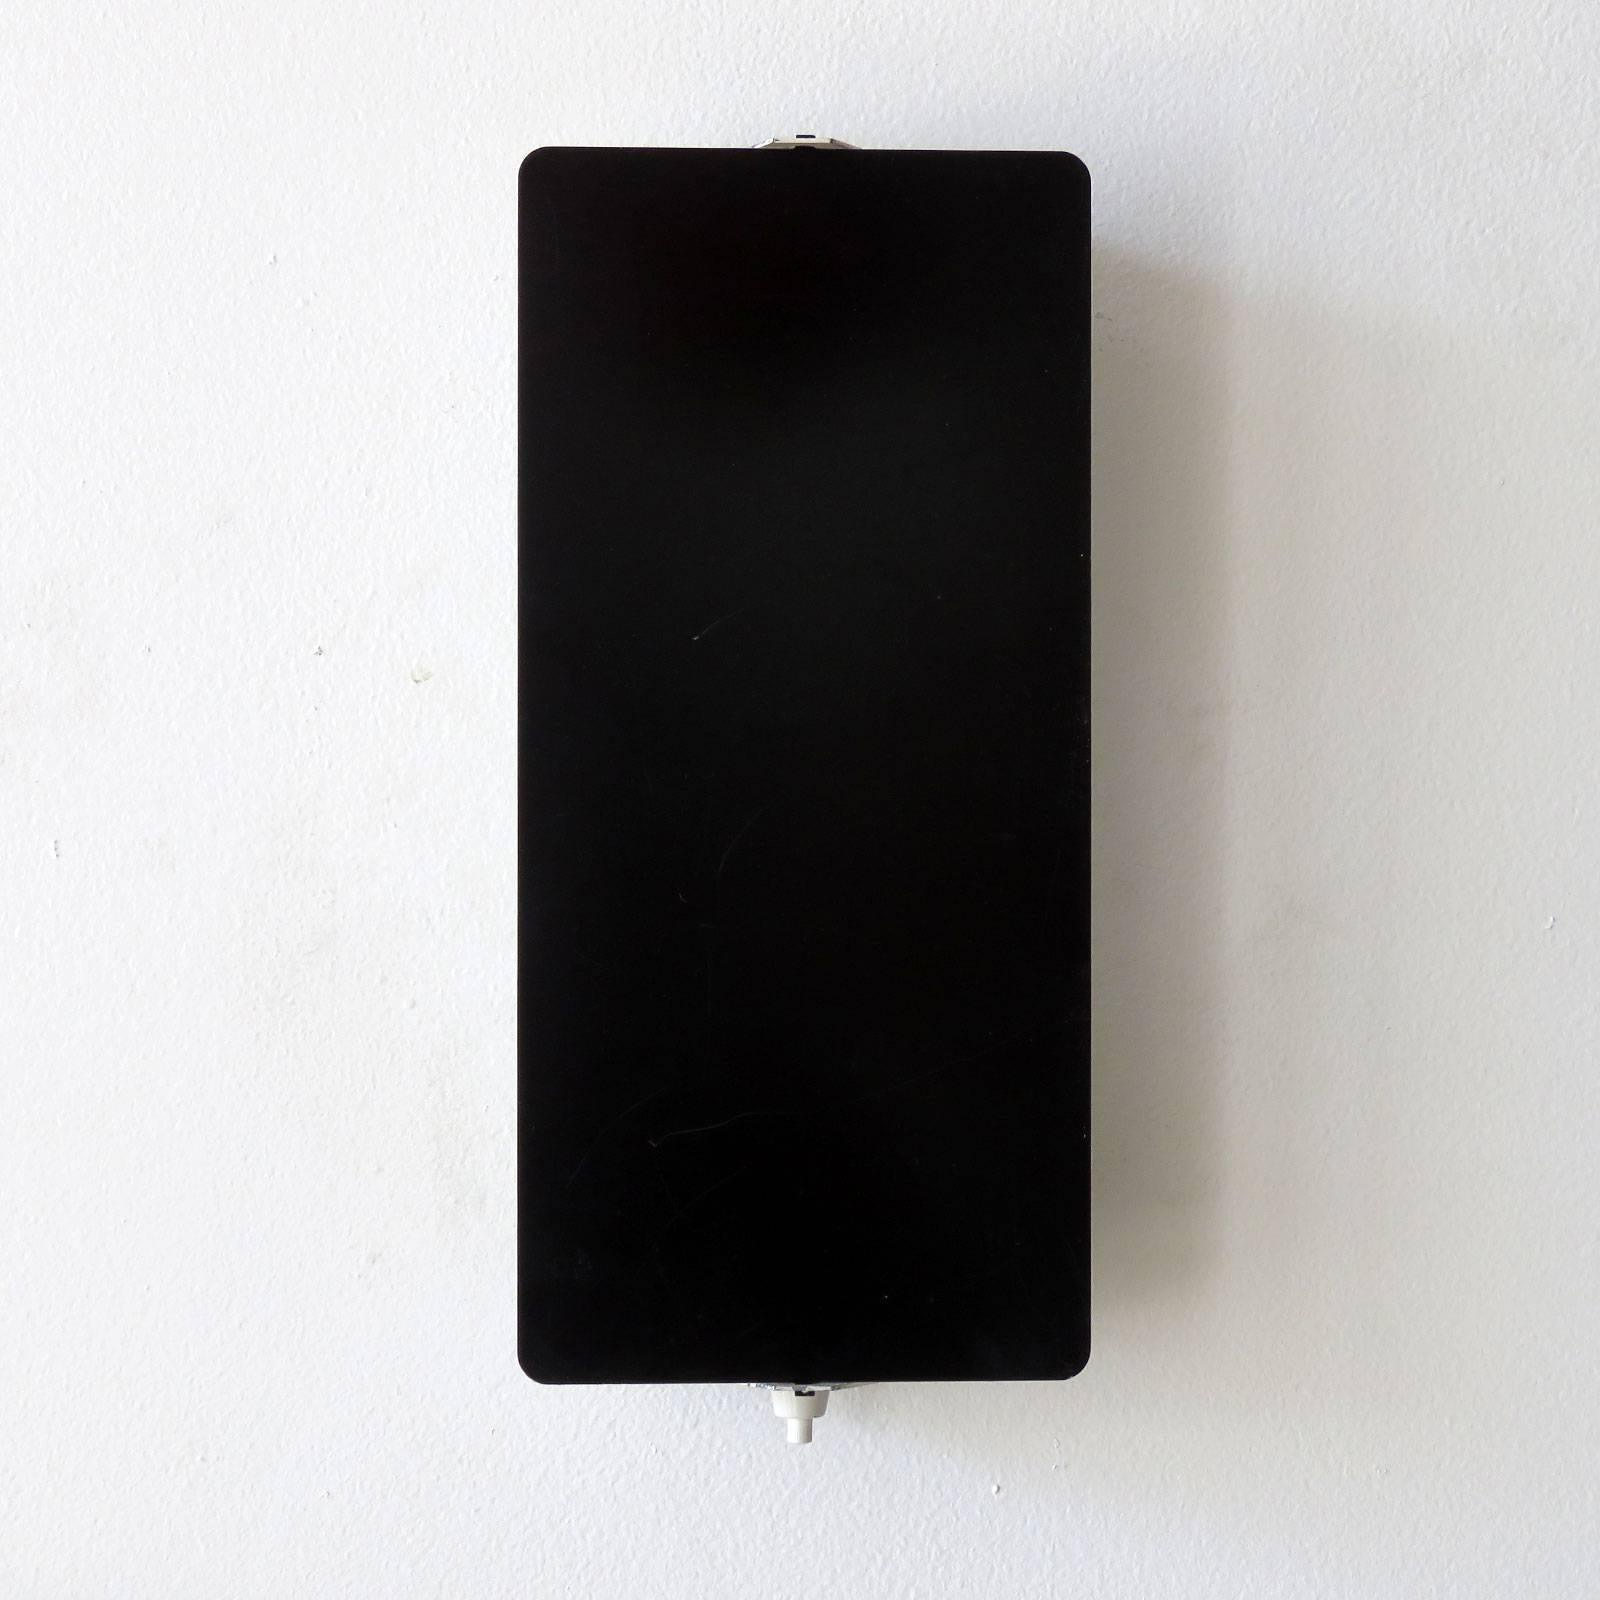 Rare large-scale enameled wall lights by Charlotte Perriand with adjustable reflectors in black enameled finish with two sockets each, optional horizontal or vertical mount, manufactured and distributed by Steph Simon, Paris, marked.